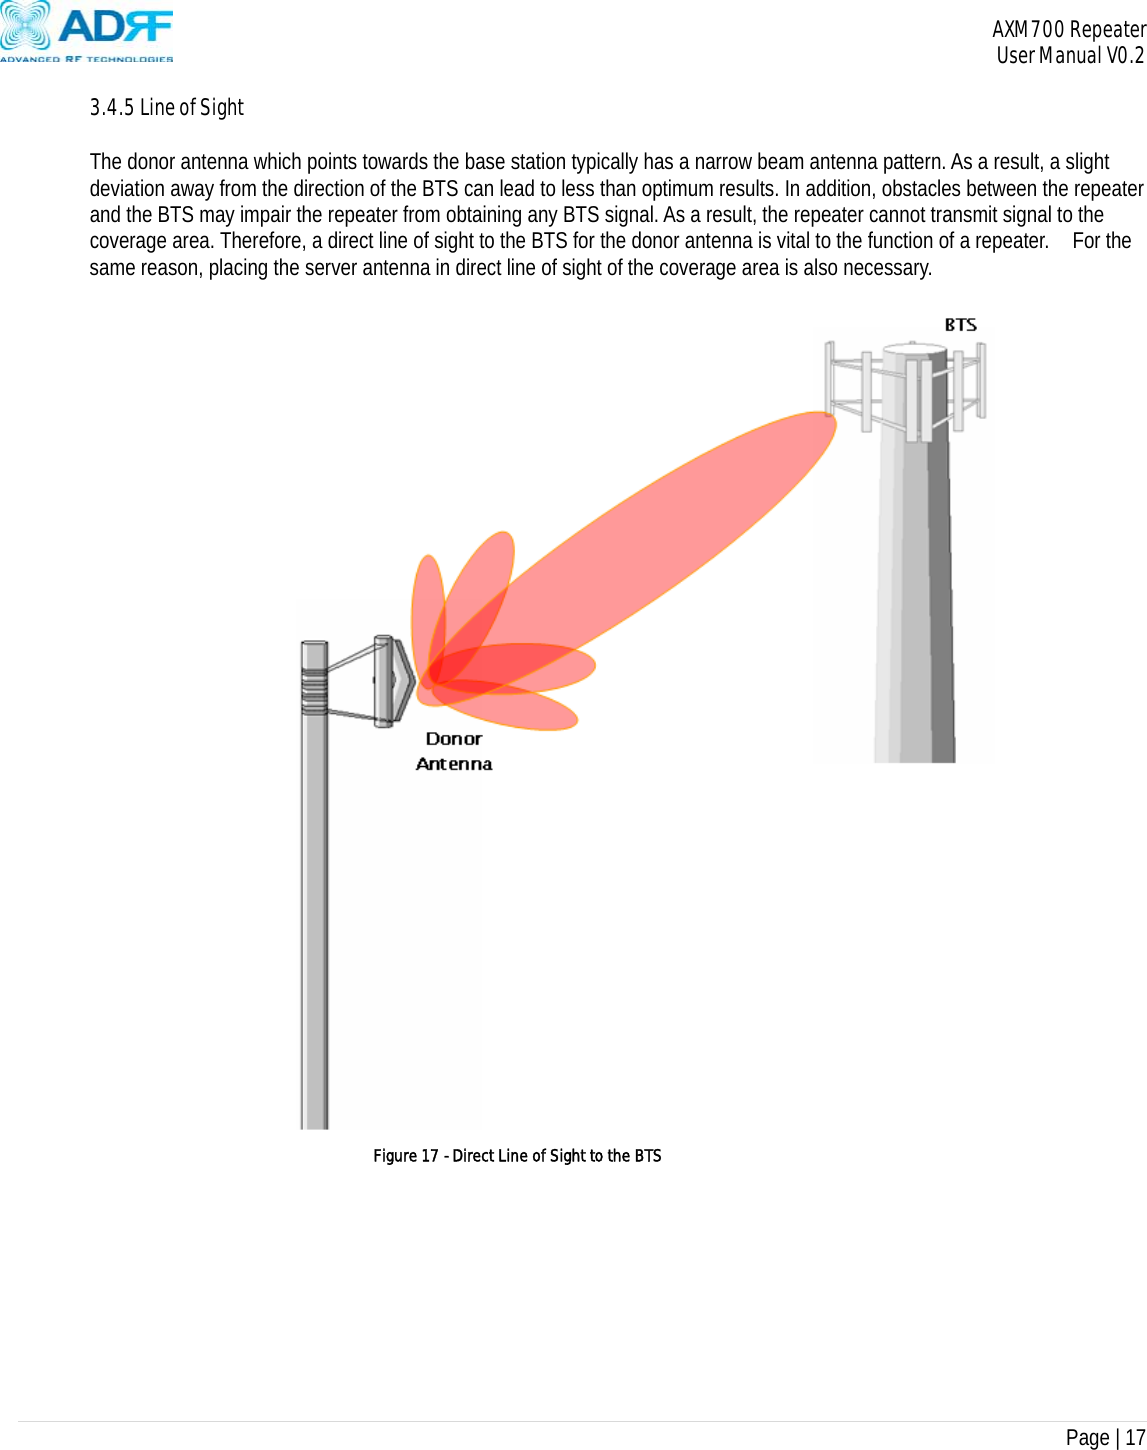 AXM700 Repeater     User Manual V0.2  Page | 17    3.4.5 Line of Sight  The donor antenna which points towards the base station typically has a narrow beam antenna pattern. As a result, a slight deviation away from the direction of the BTS can lead to less than optimum results. In addition, obstacles between the repeater and the BTS may impair the repeater from obtaining any BTS signal. As a result, the repeater cannot transmit signal to the coverage area. Therefore, a direct line of sight to the BTS for the donor antenna is vital to the function of a repeater.    For the same reason, placing the server antenna in direct line of sight of the coverage area is also necessary.       Figure 17 - Direct Line of Sight to the BTS 